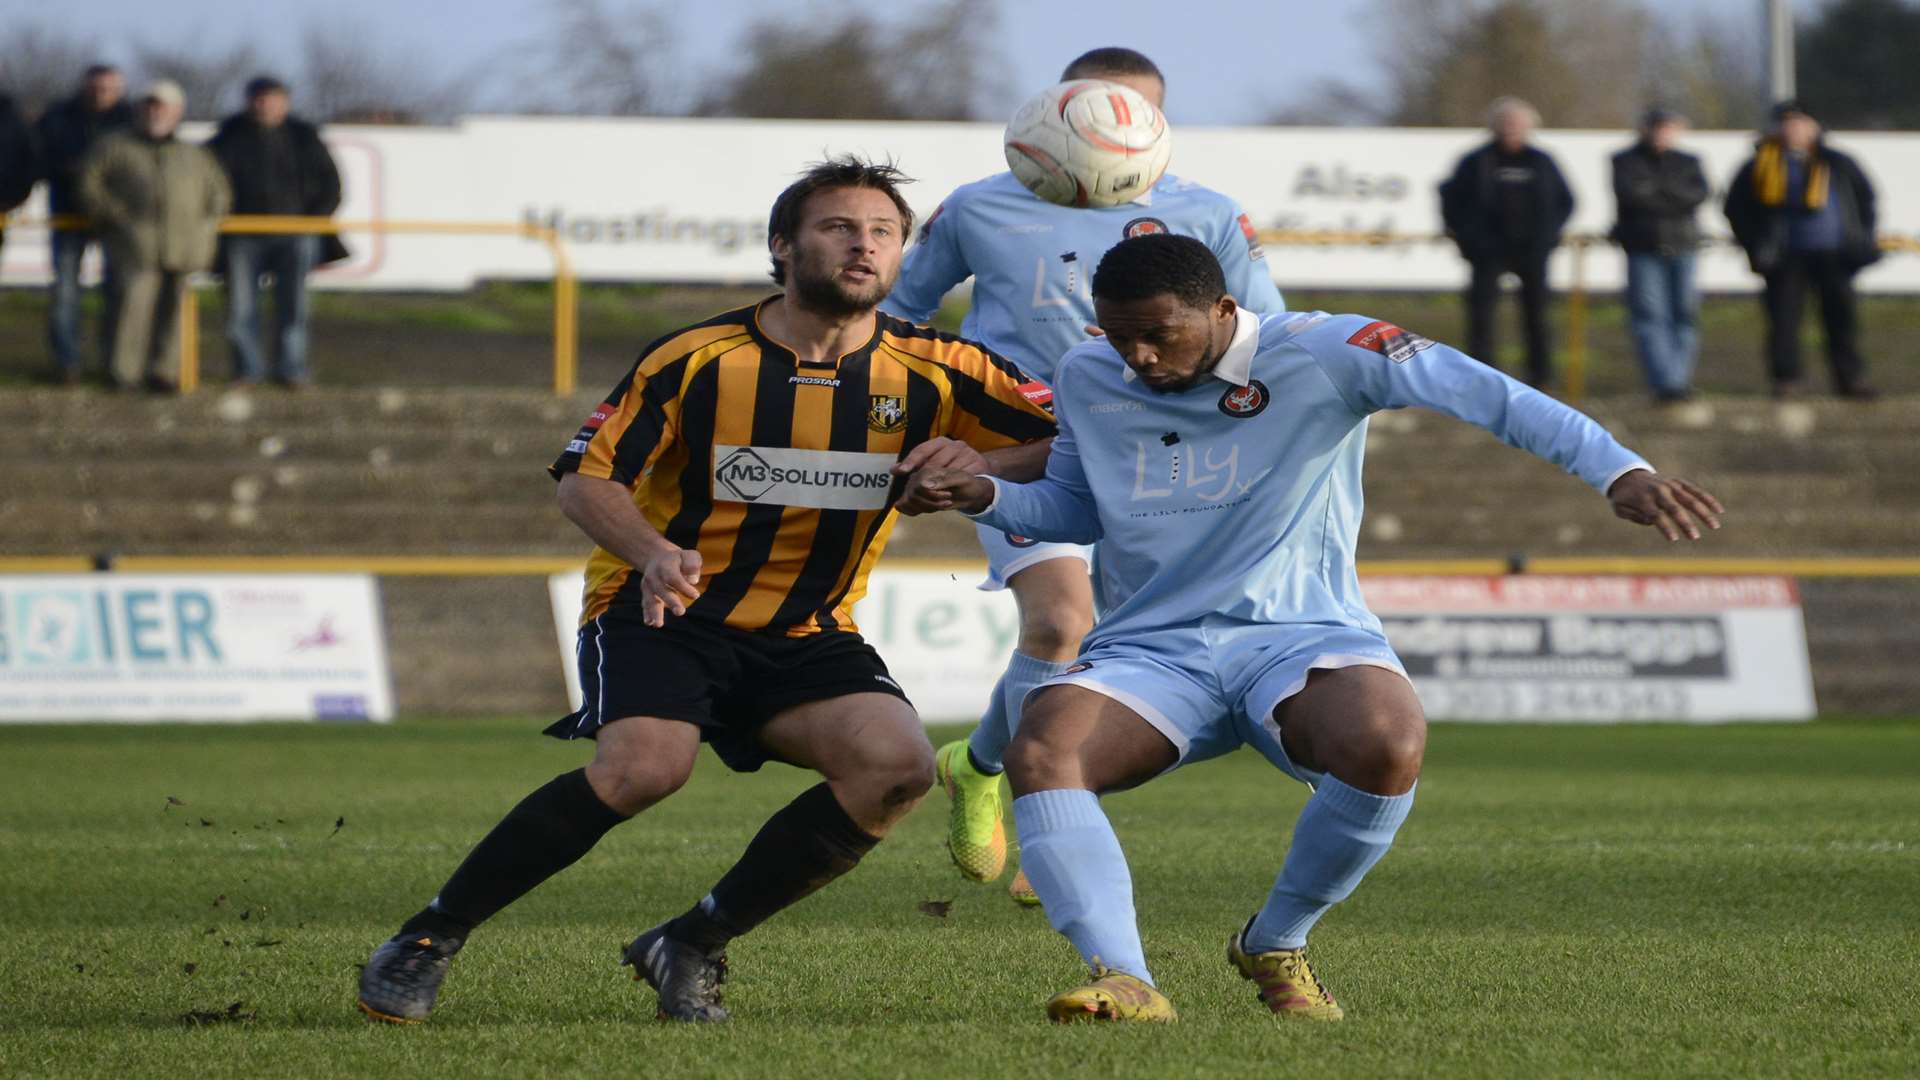 Micheal Everitt playing for Folkestone against Walton Casuals Picture: Paul Amos